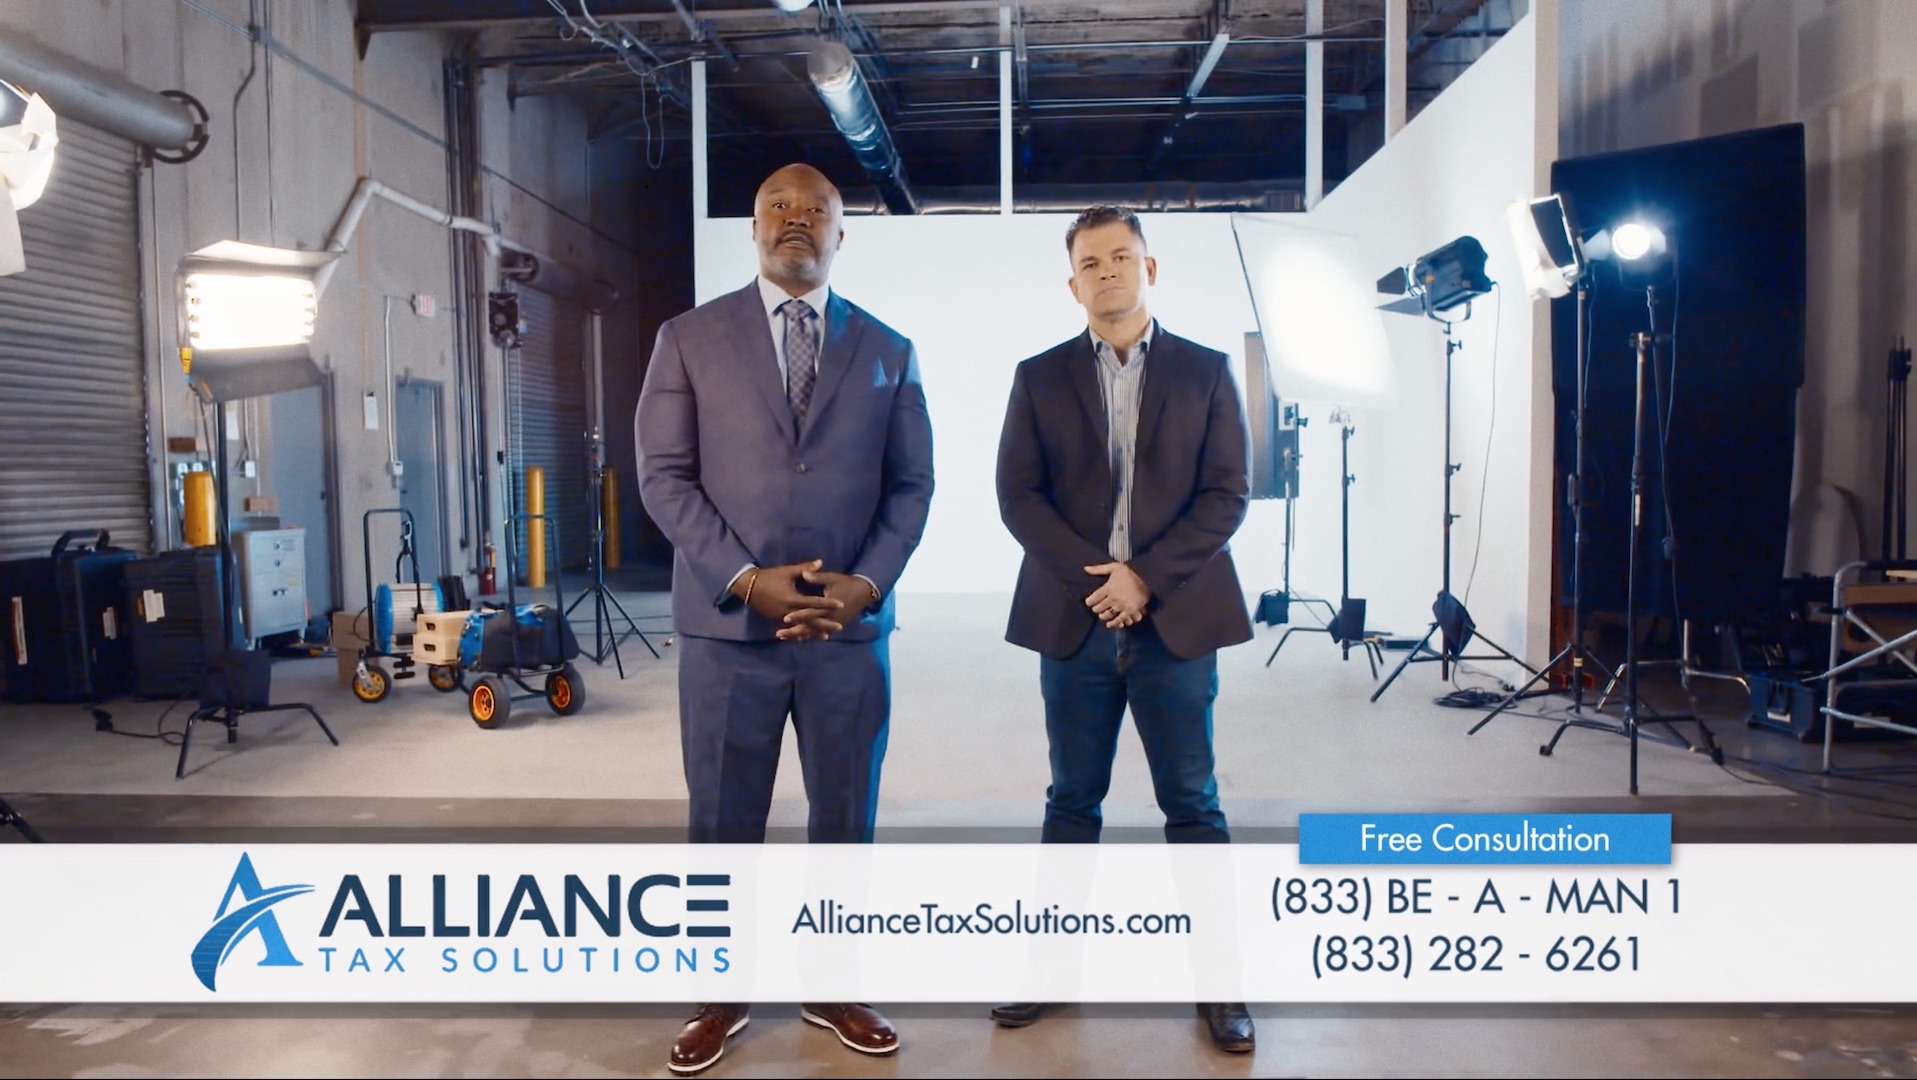 Two men from Alliance Tax Solutions break through the fourth wall.